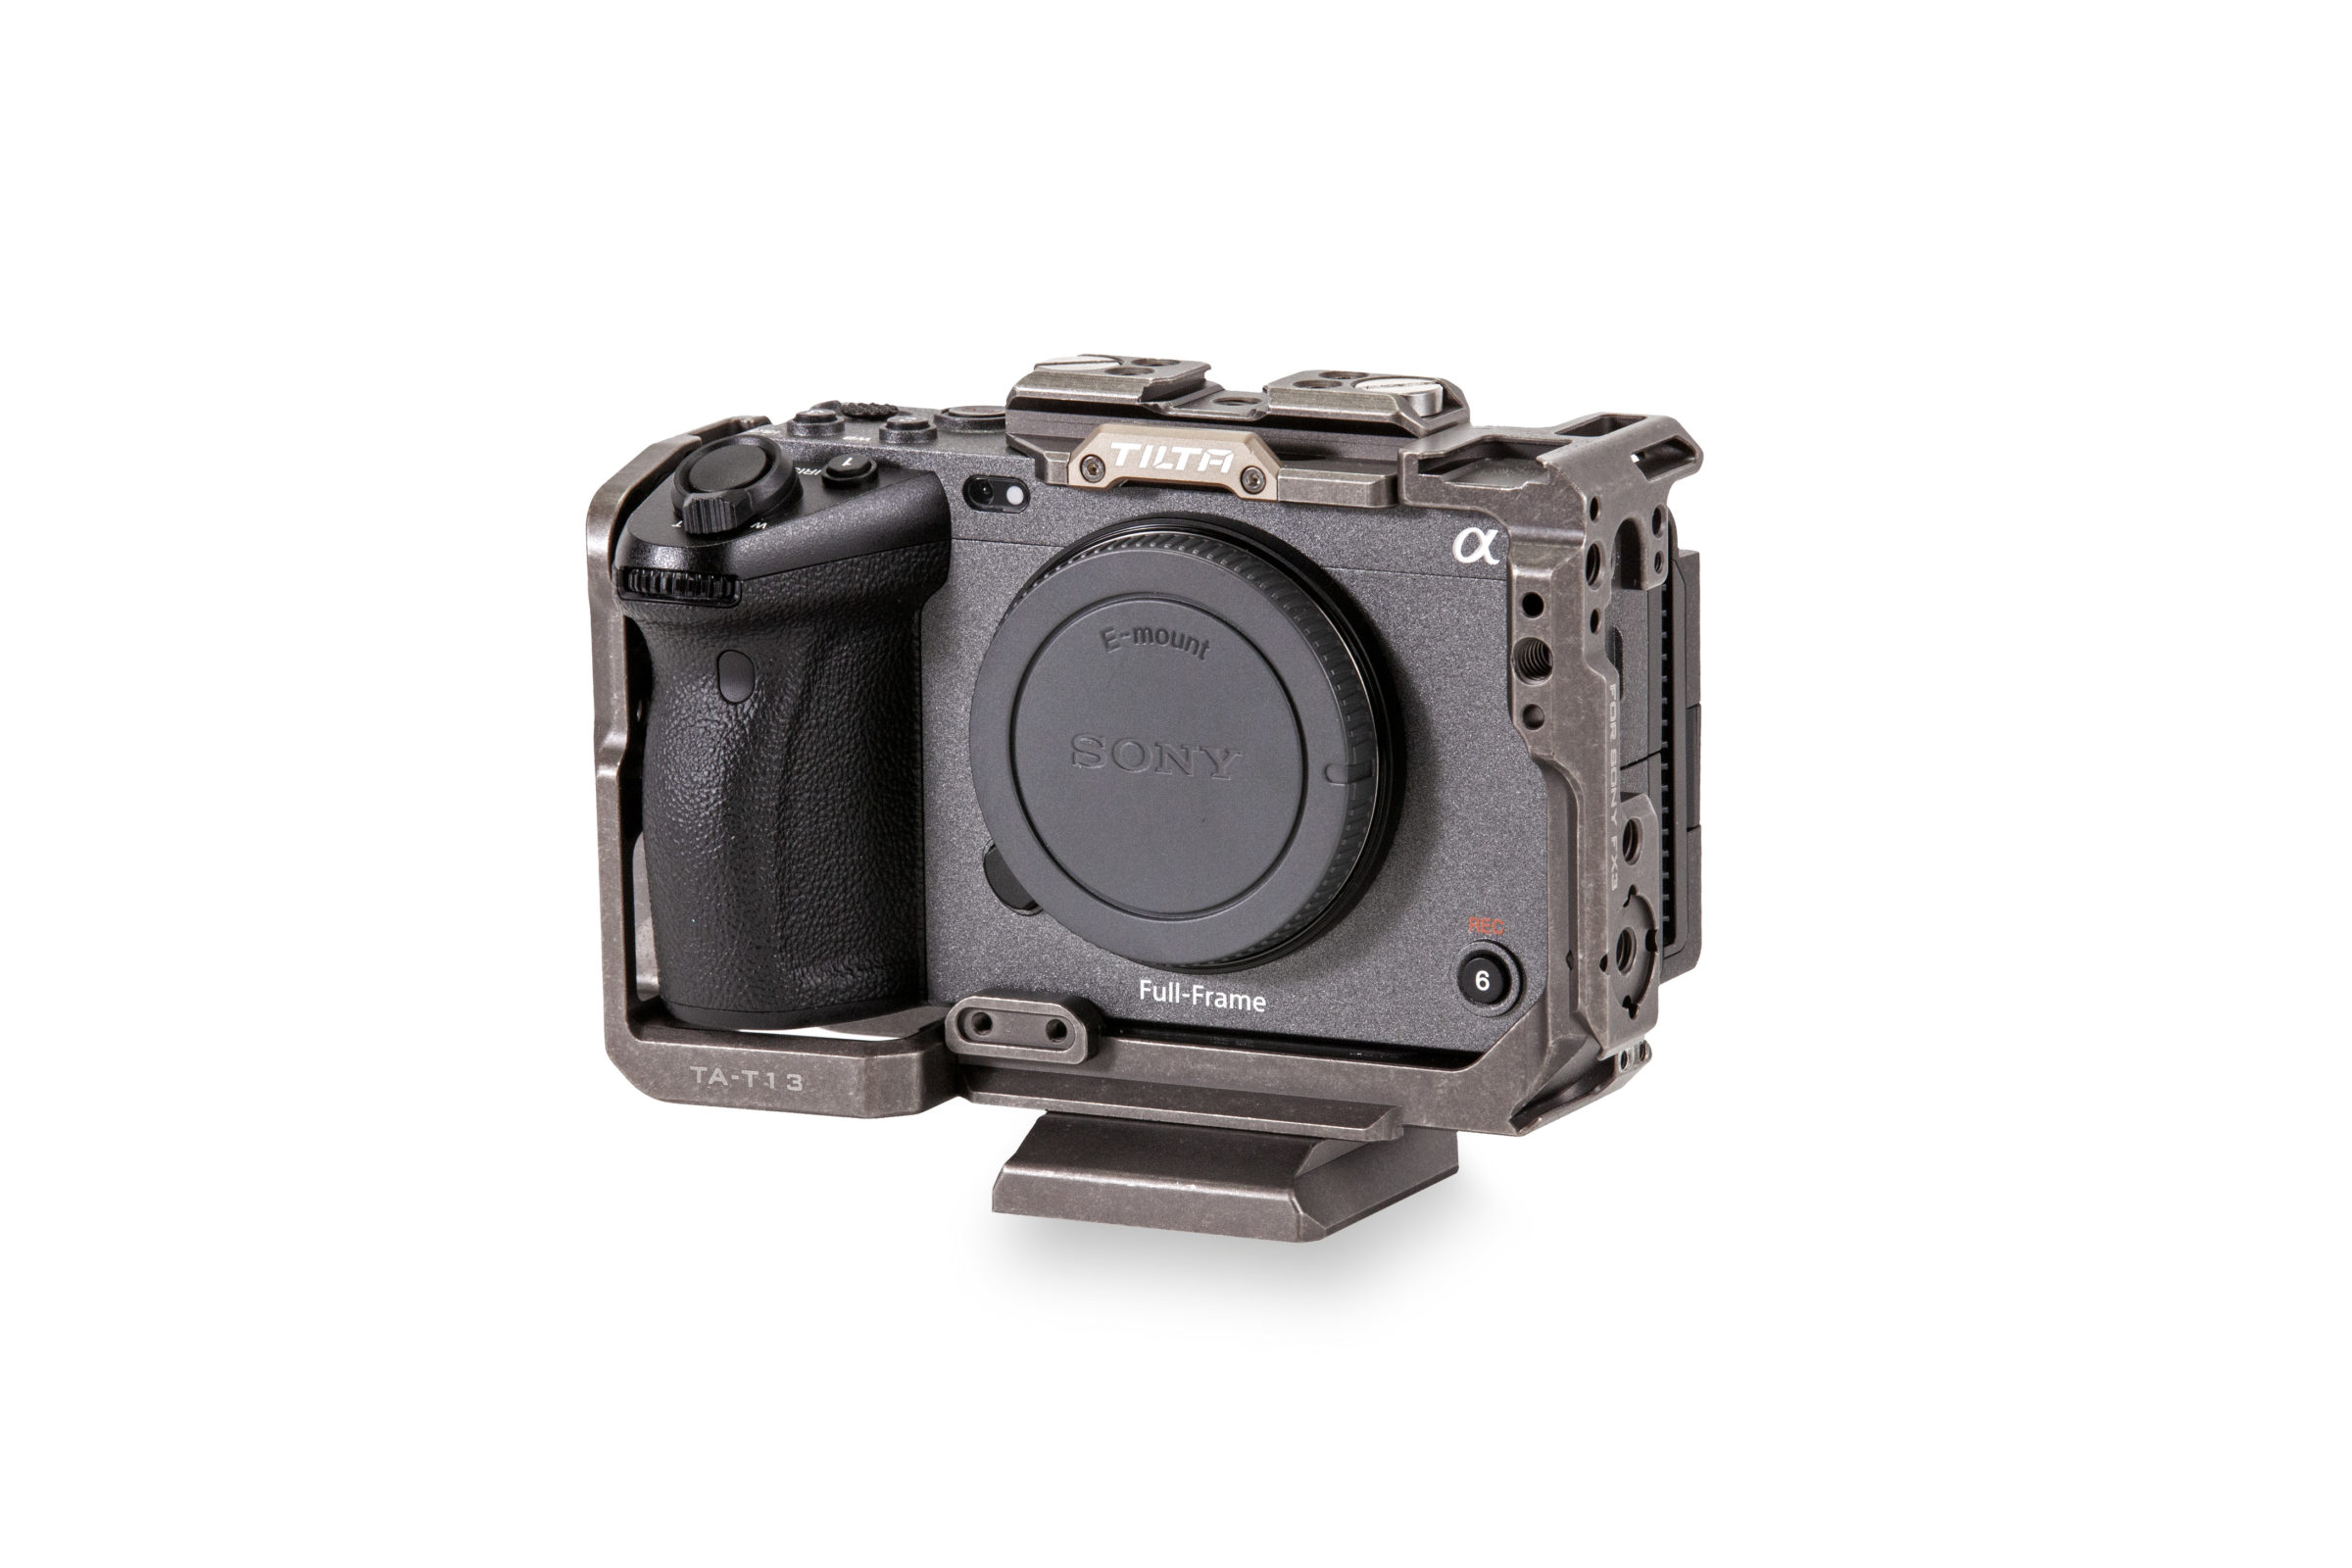 Full Camera Cage for Sony FX3 / FX30 - Tactical Gray (Open Box)